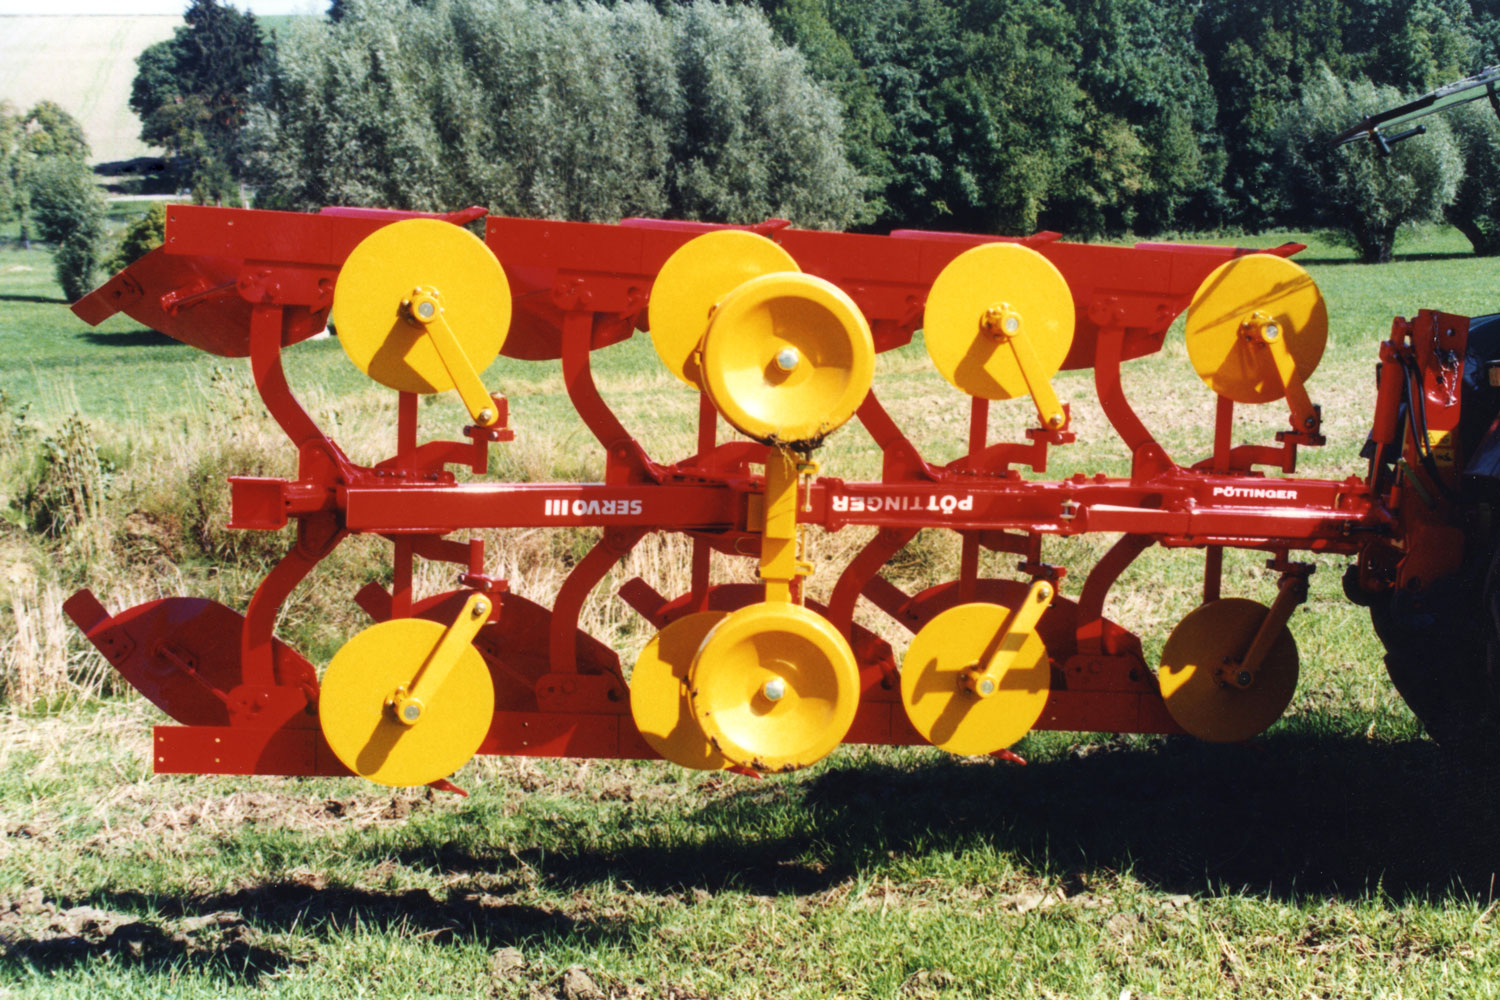 The SERVO plough in its striking colour combination is now made entirely in Grieskirchen.